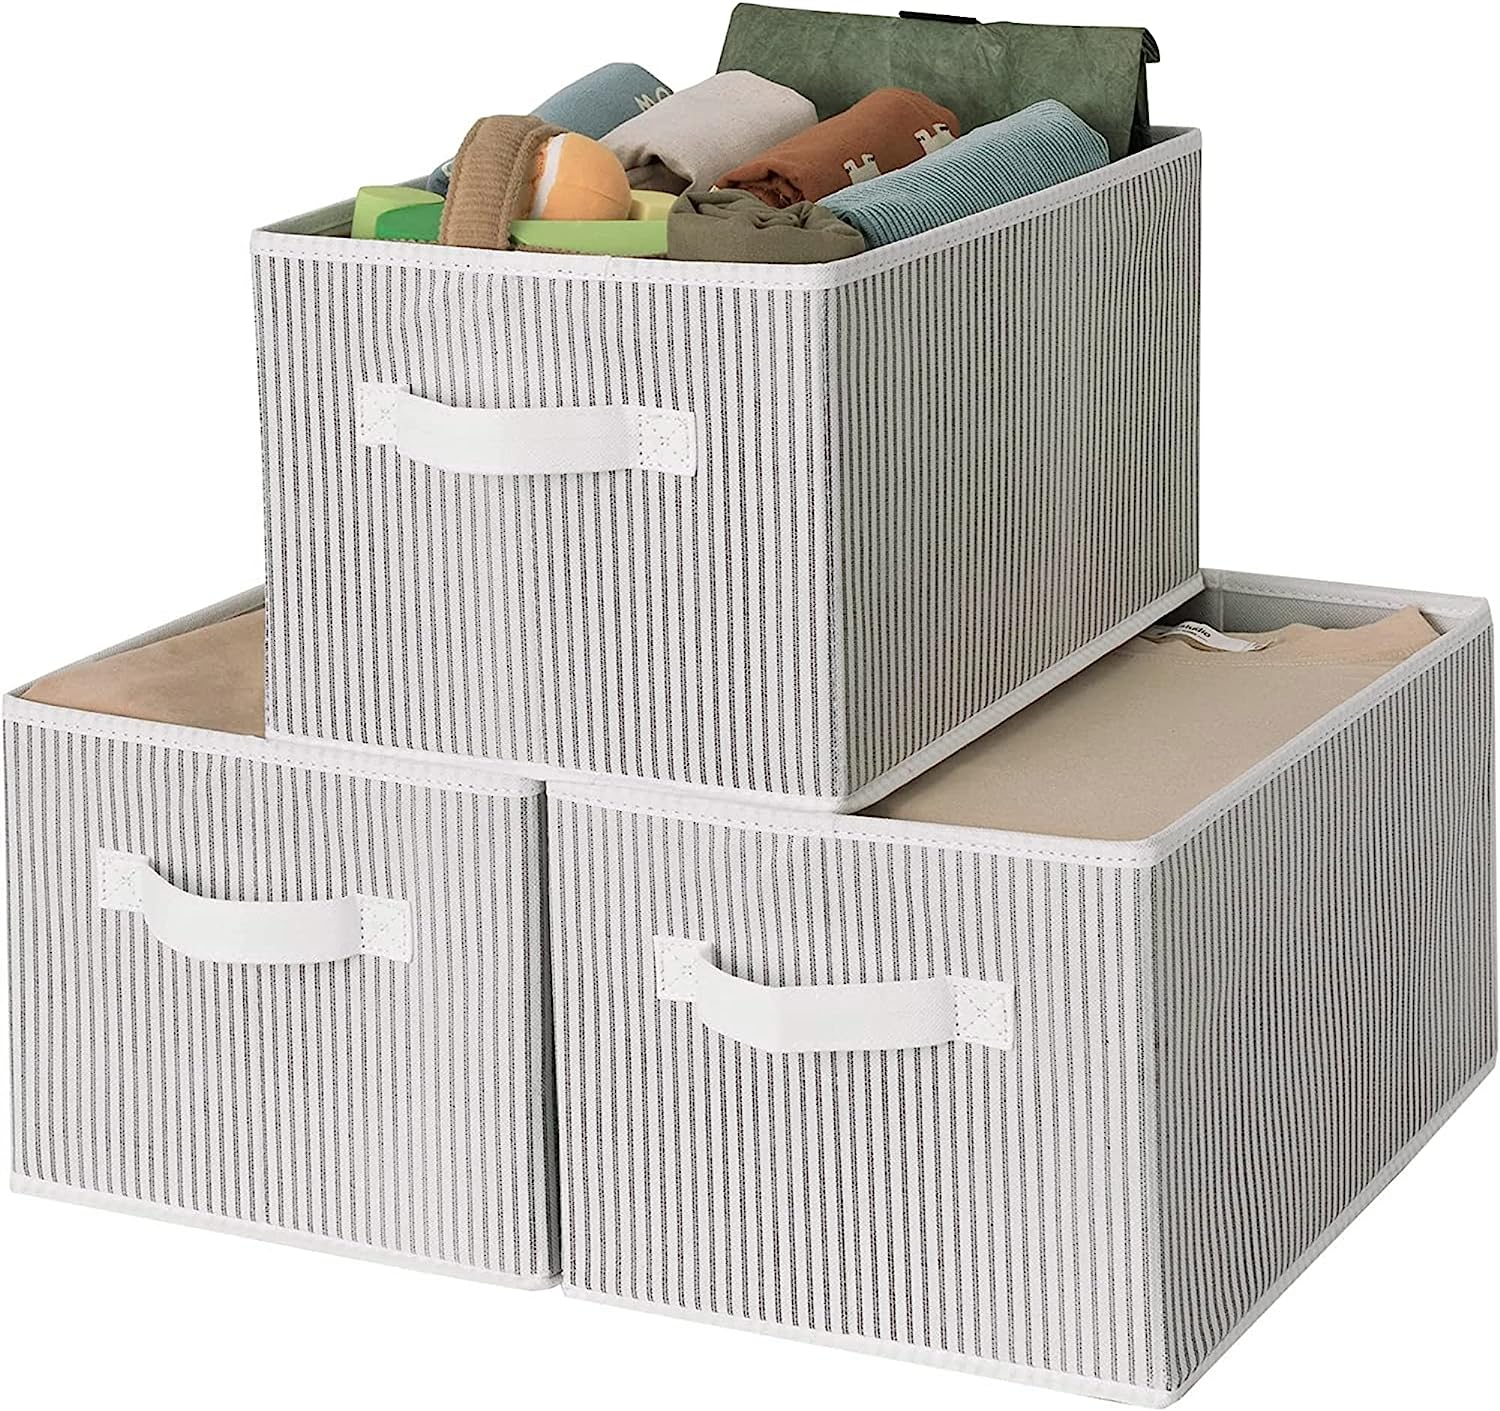 Blushbees® Collapsible Closet Storage Bins - White/Gray, 3-Pack